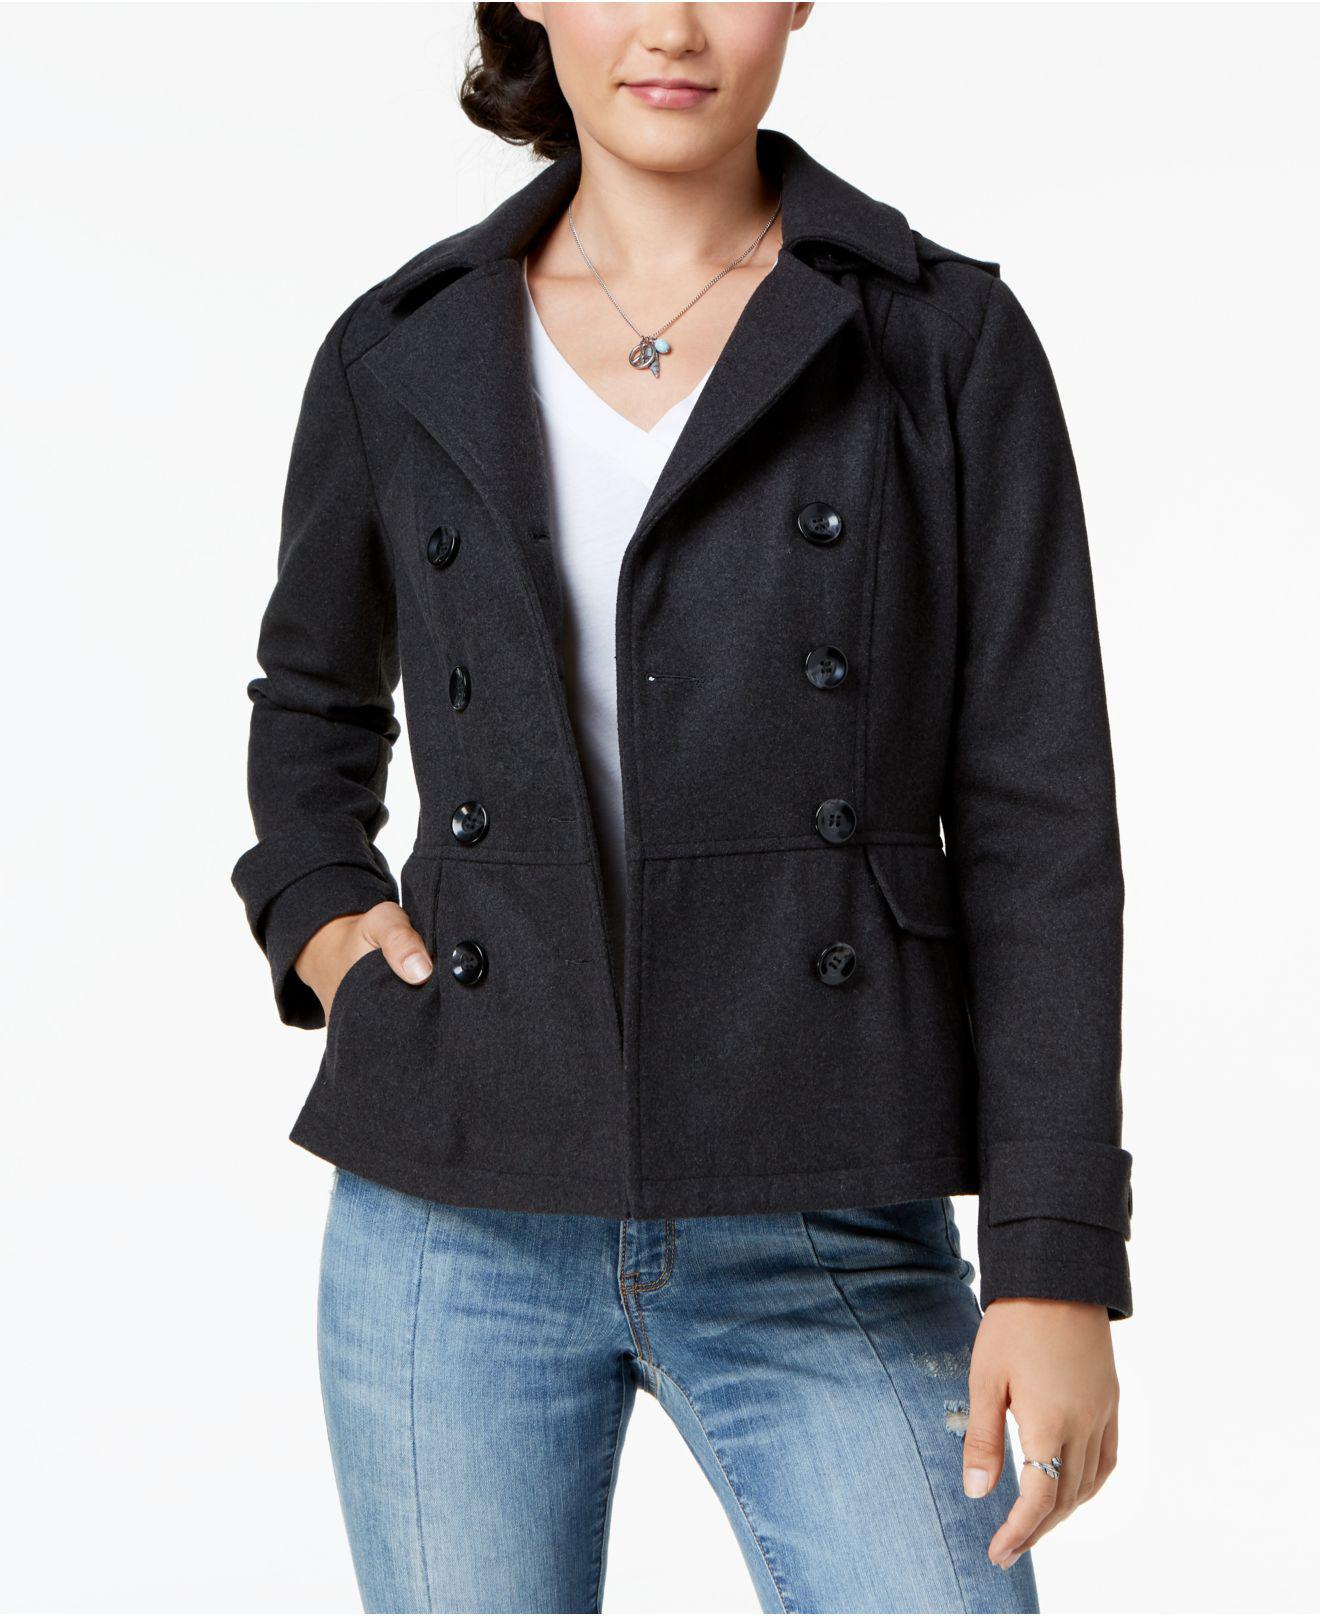 woocommerce-673321-2209615.cloudwaysapps.com-celebrity-pink-womens-charcoal-double-breasted-hooded-peacoat-jacket